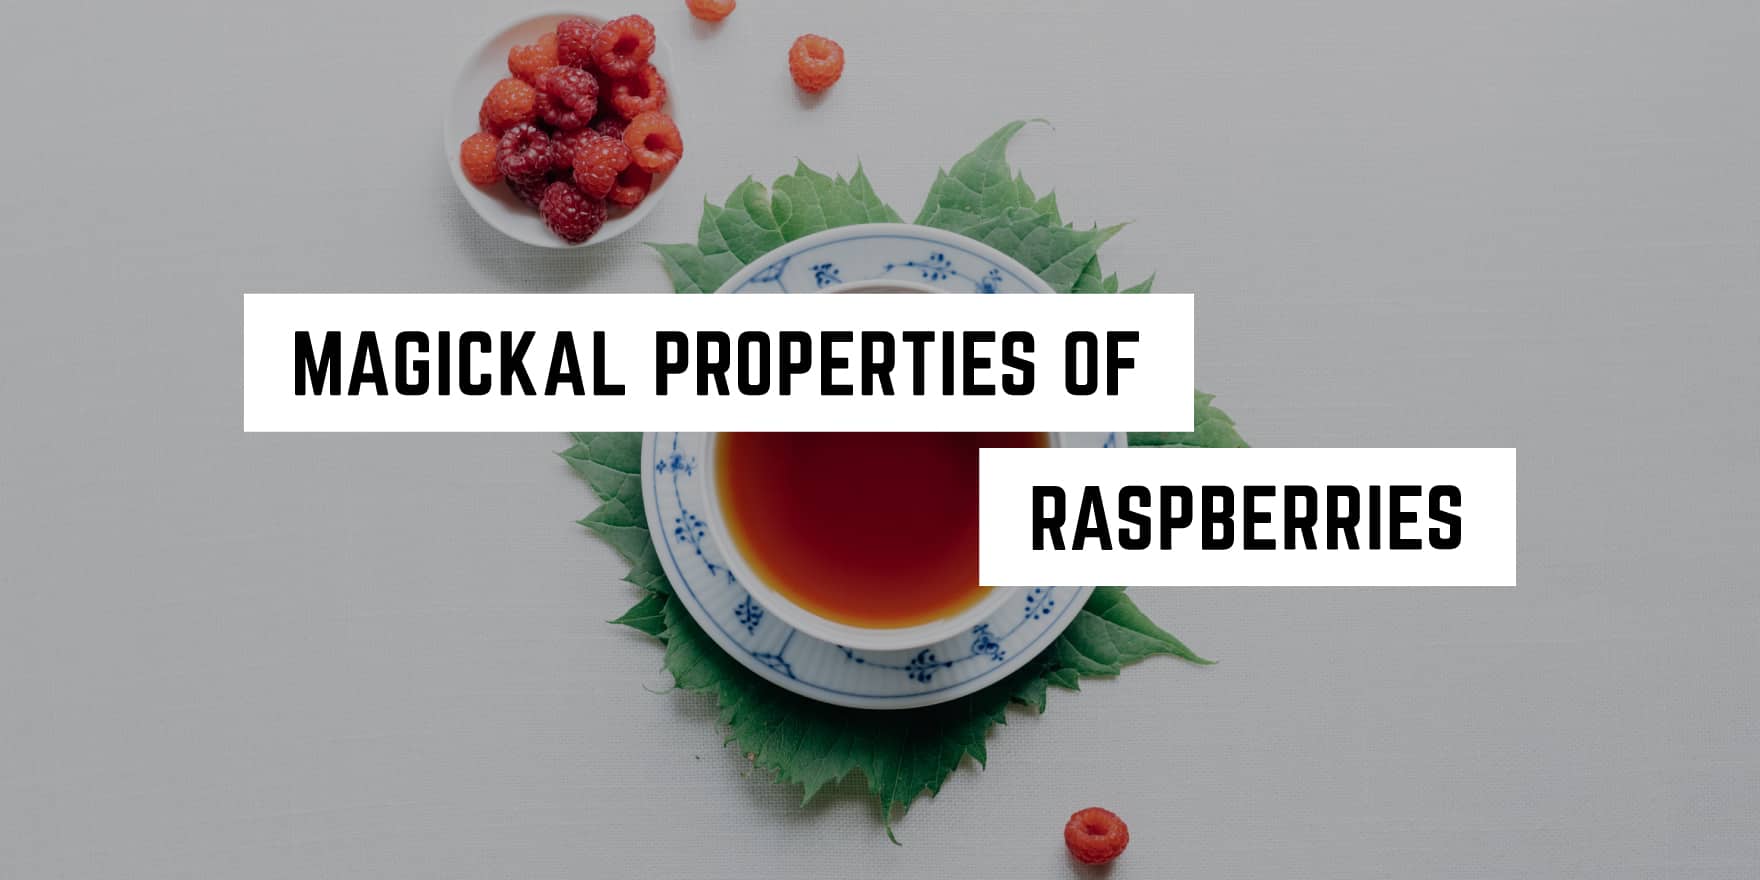 A cup of tea surrounded by fresh raspberries and leaves with text overlay "spiritual properties of raspberries" at a metaphysical shop.